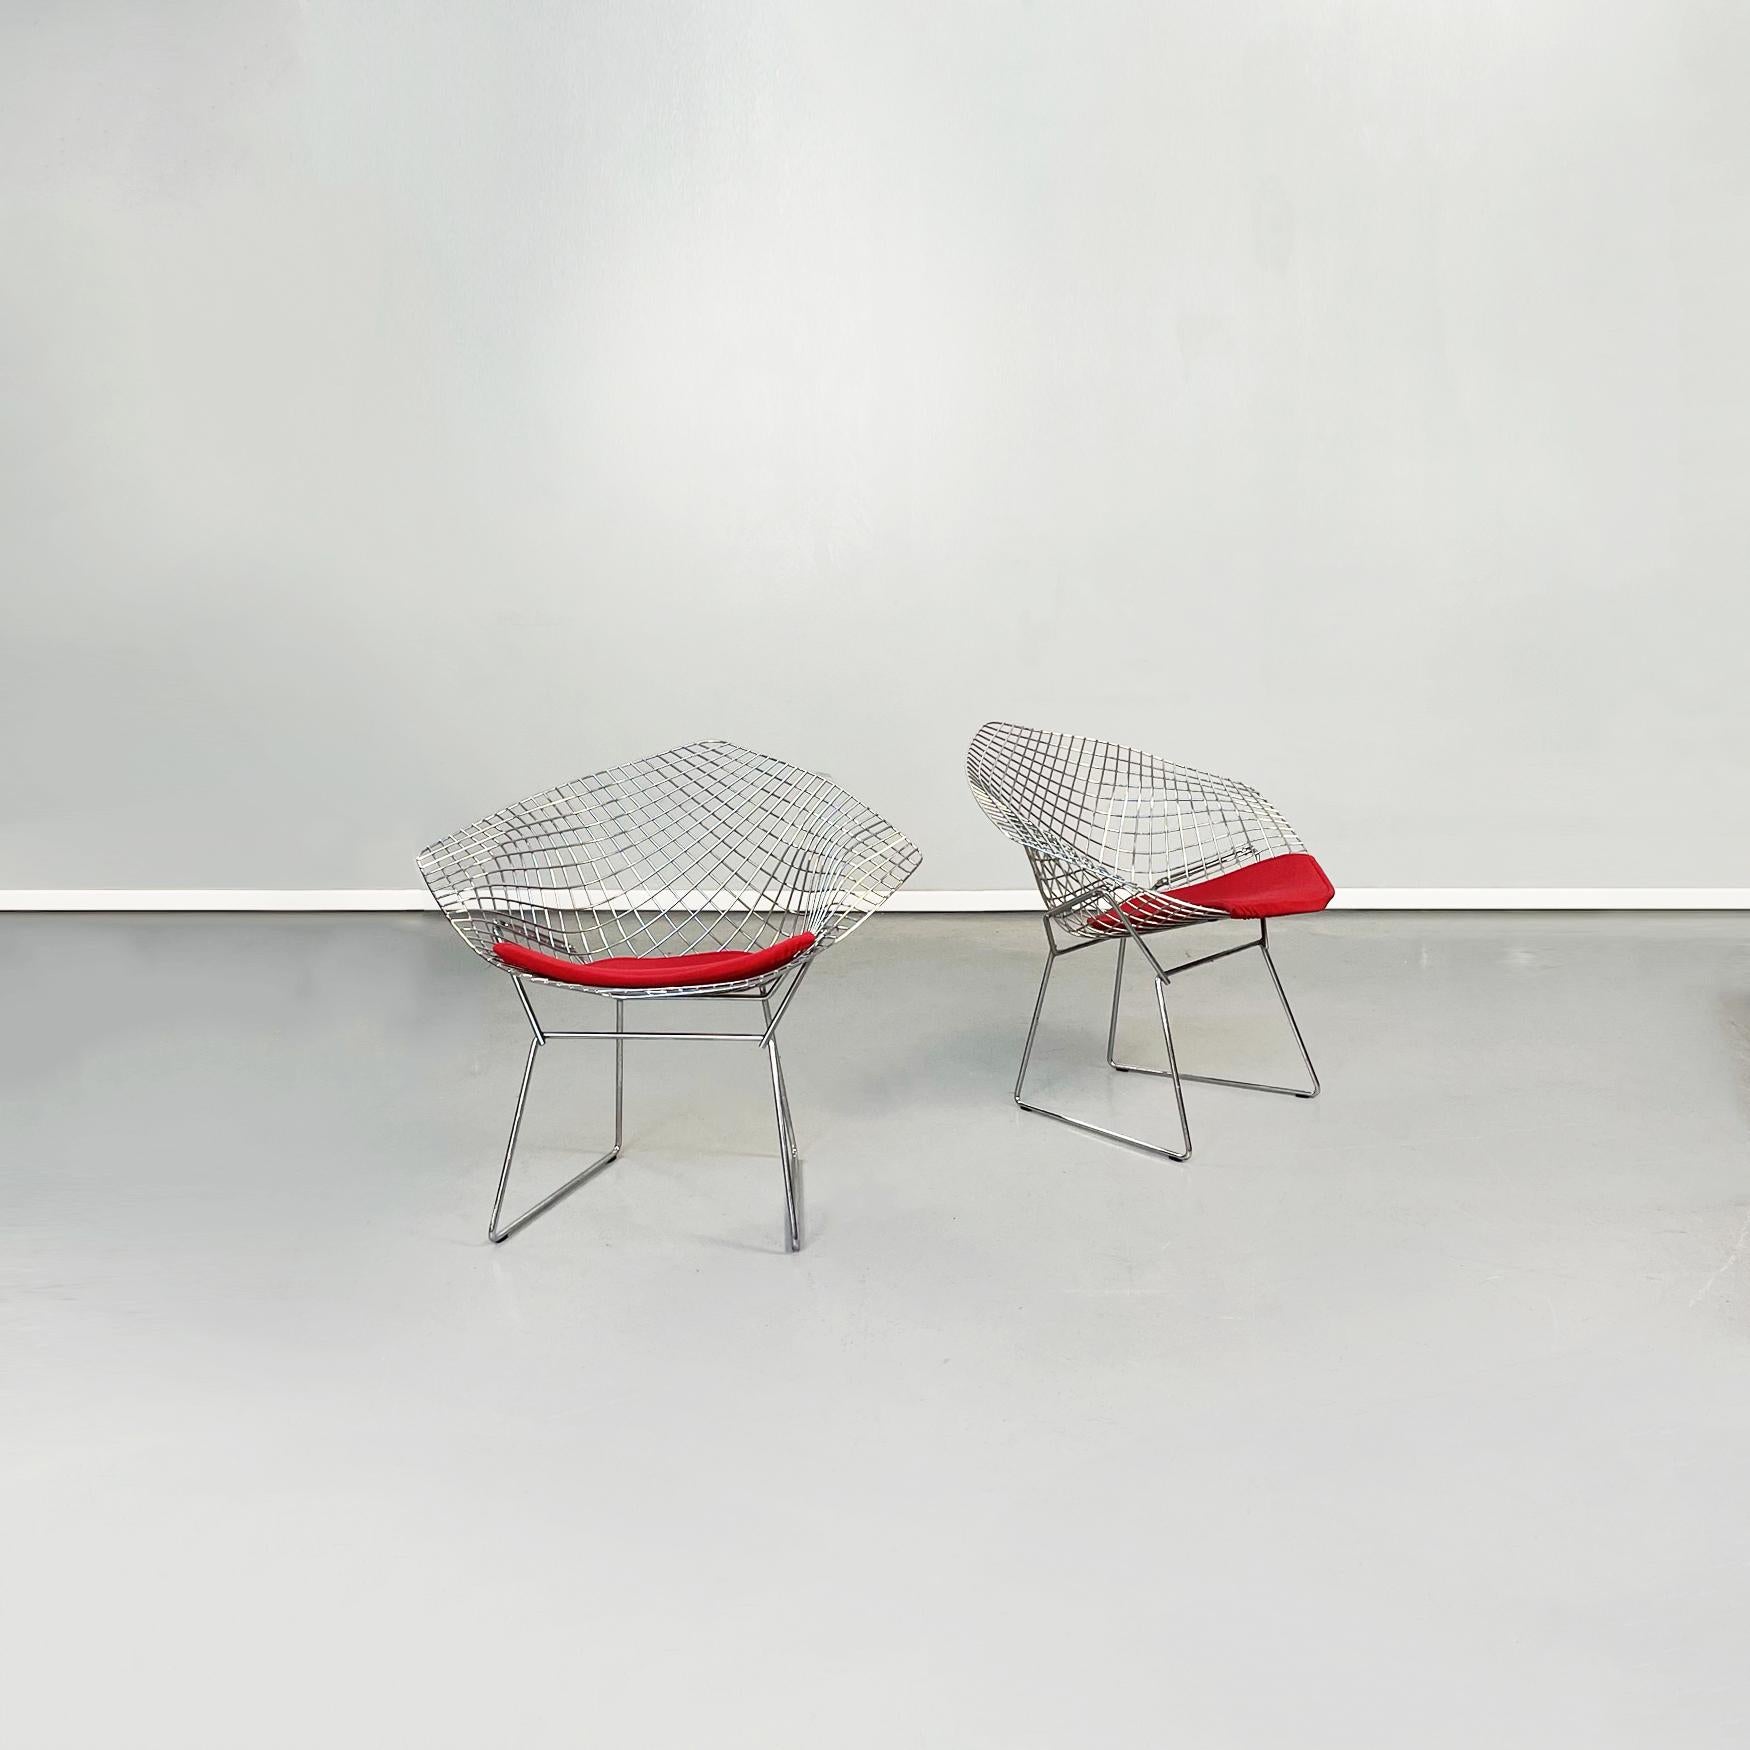 USA mid-century Red cushion and steel Diamond armchairs by Bertoia for Knoll, 1970s.
Set of four Diamond armchairs with structure in welded steel rods with polished chrome plating. The red cushion attaches directly to the frame with hidden